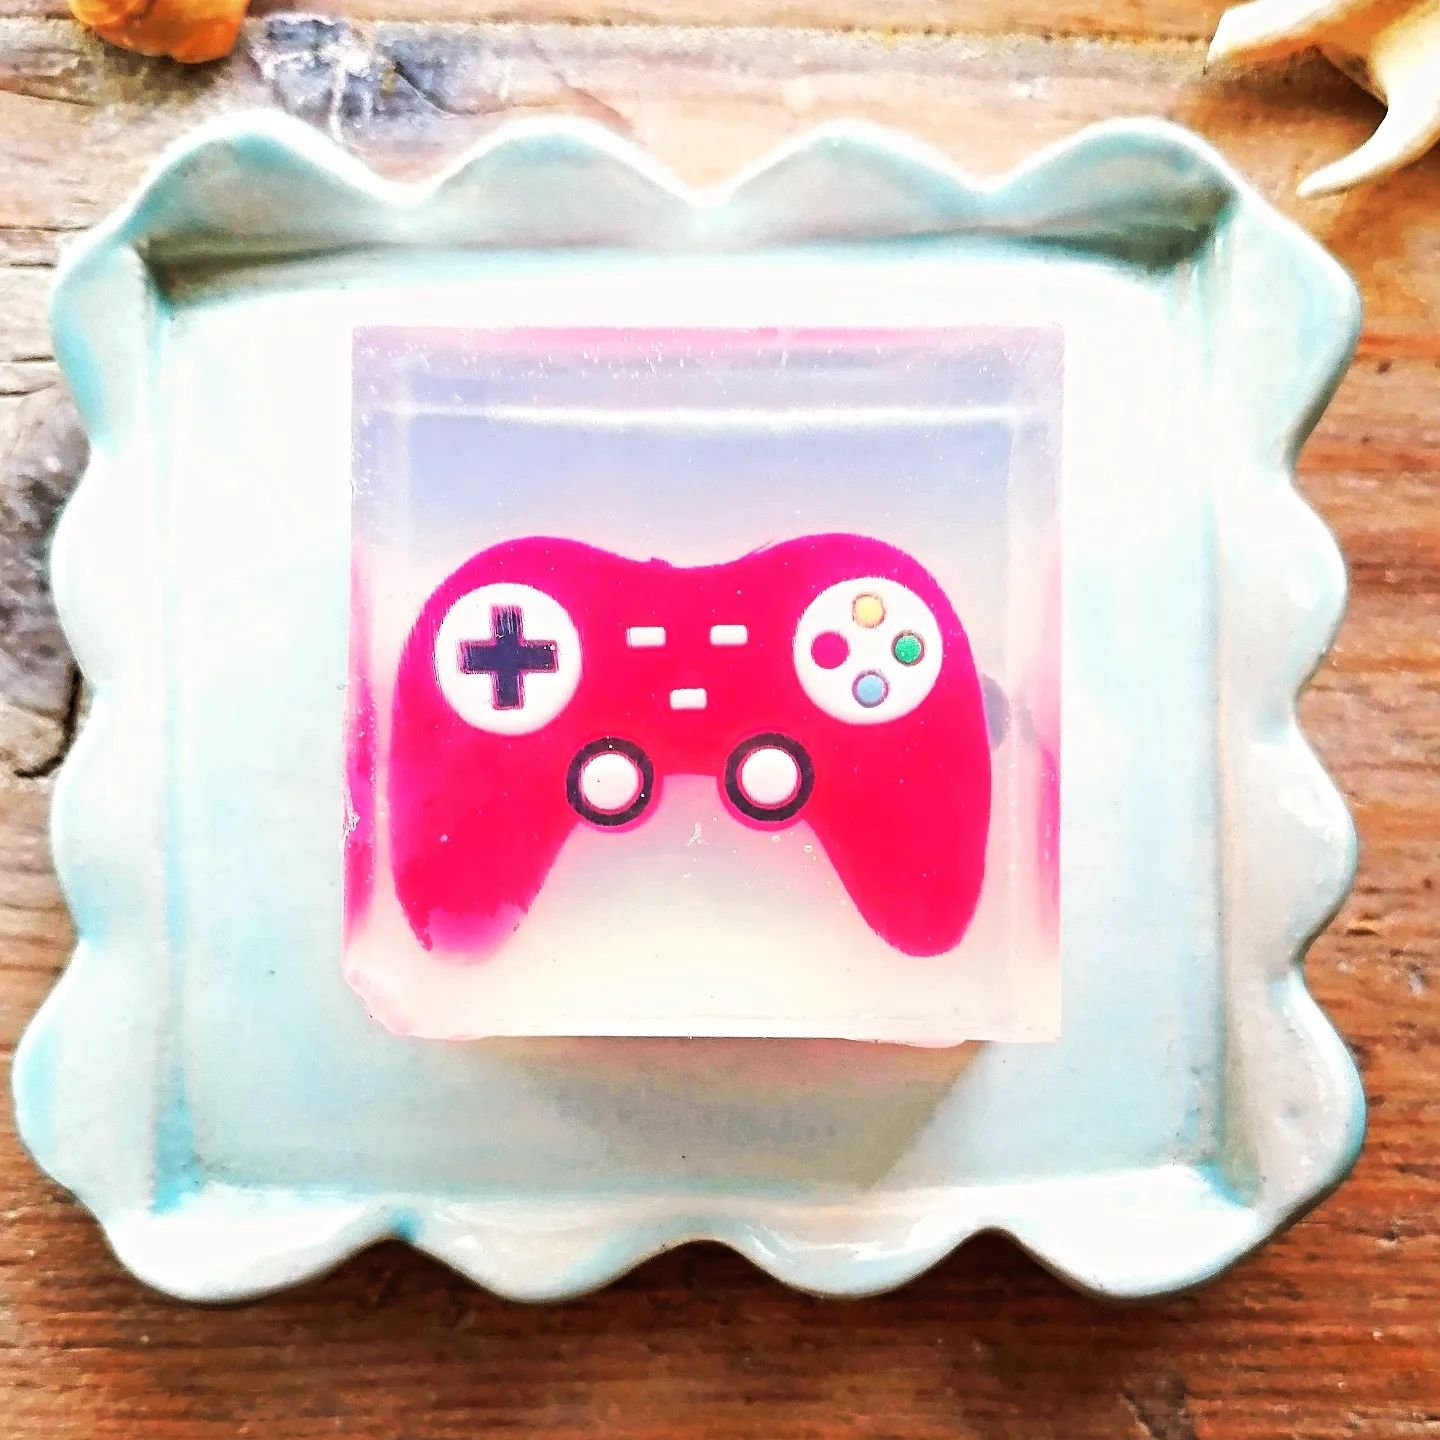 15% off all orders till midnight tonight! Chuckle Soaps are guaranteed - absolutely GUARANTEED - to raise a smile! So whether it's for your gaming obsessed tween who would totally appreciate a console in a soap, someone you love with one of our amazi